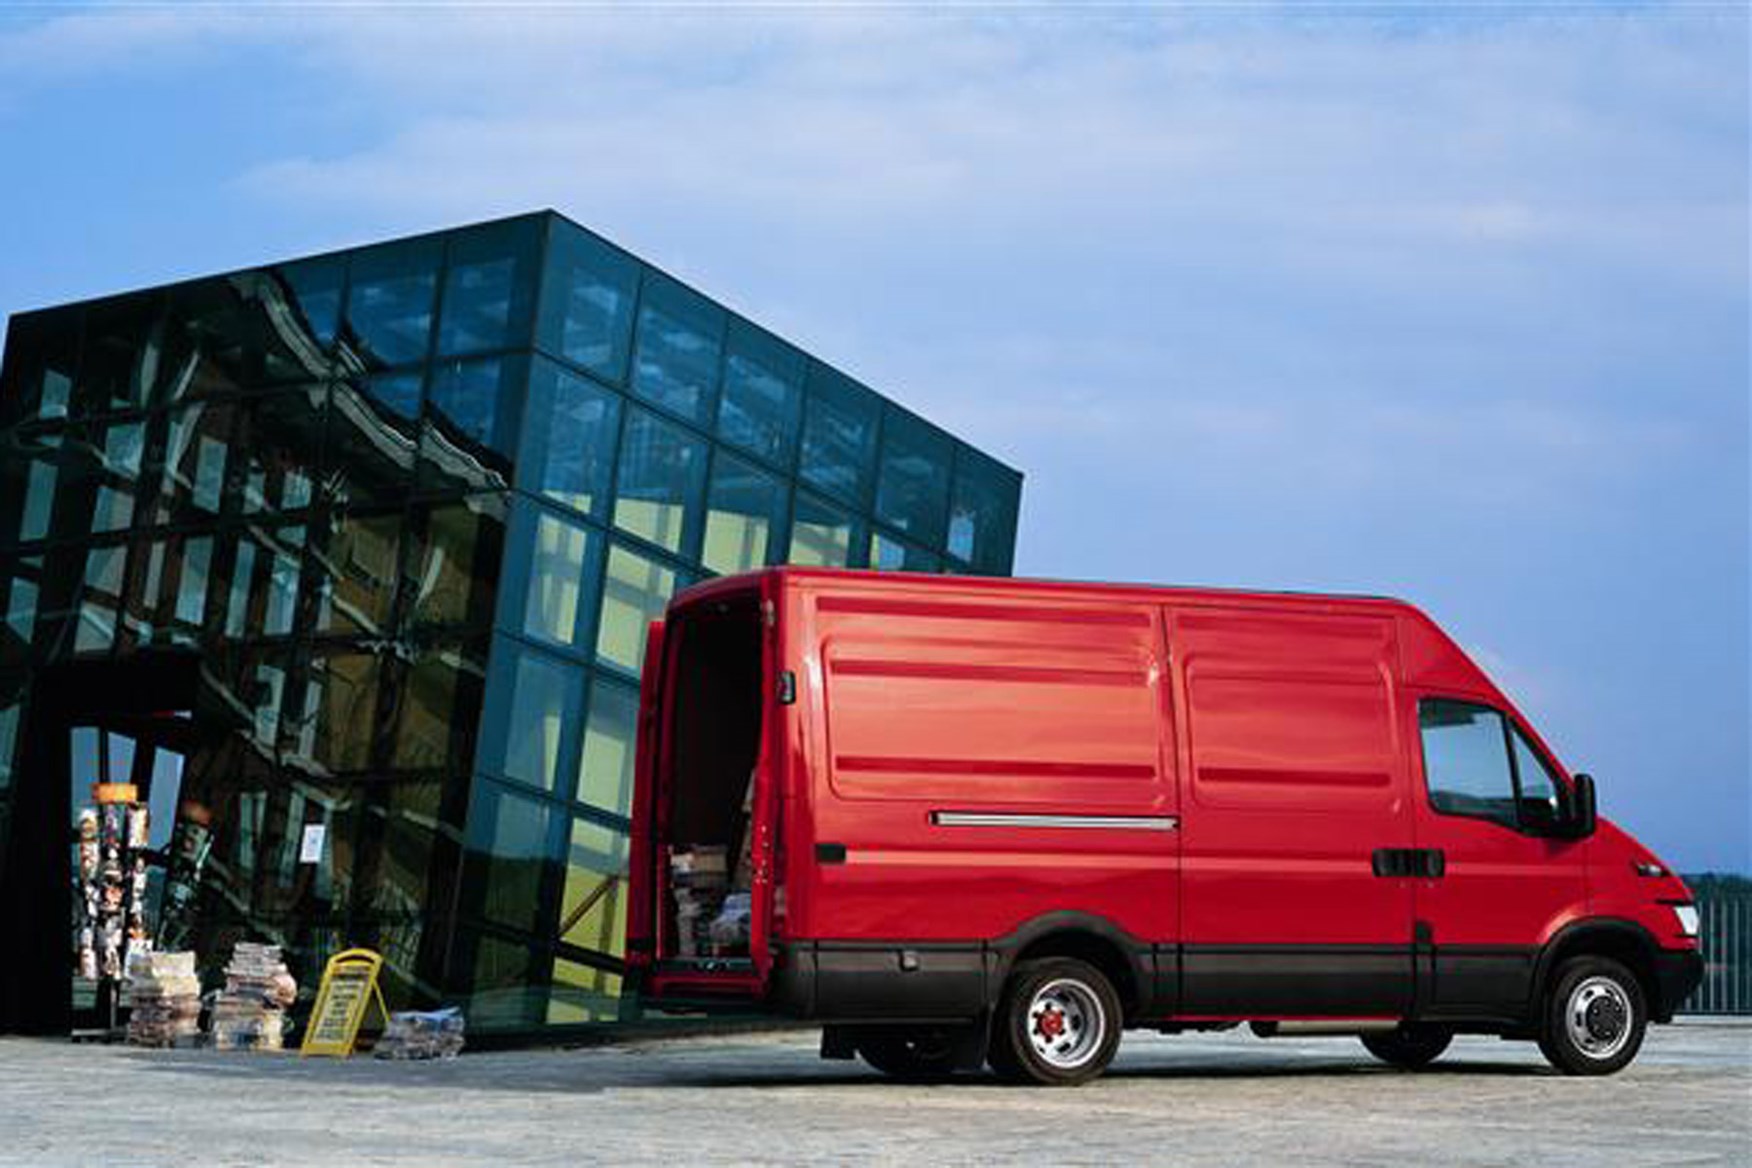 Iveco Daily review on Parkers Vans - dimensions and load area